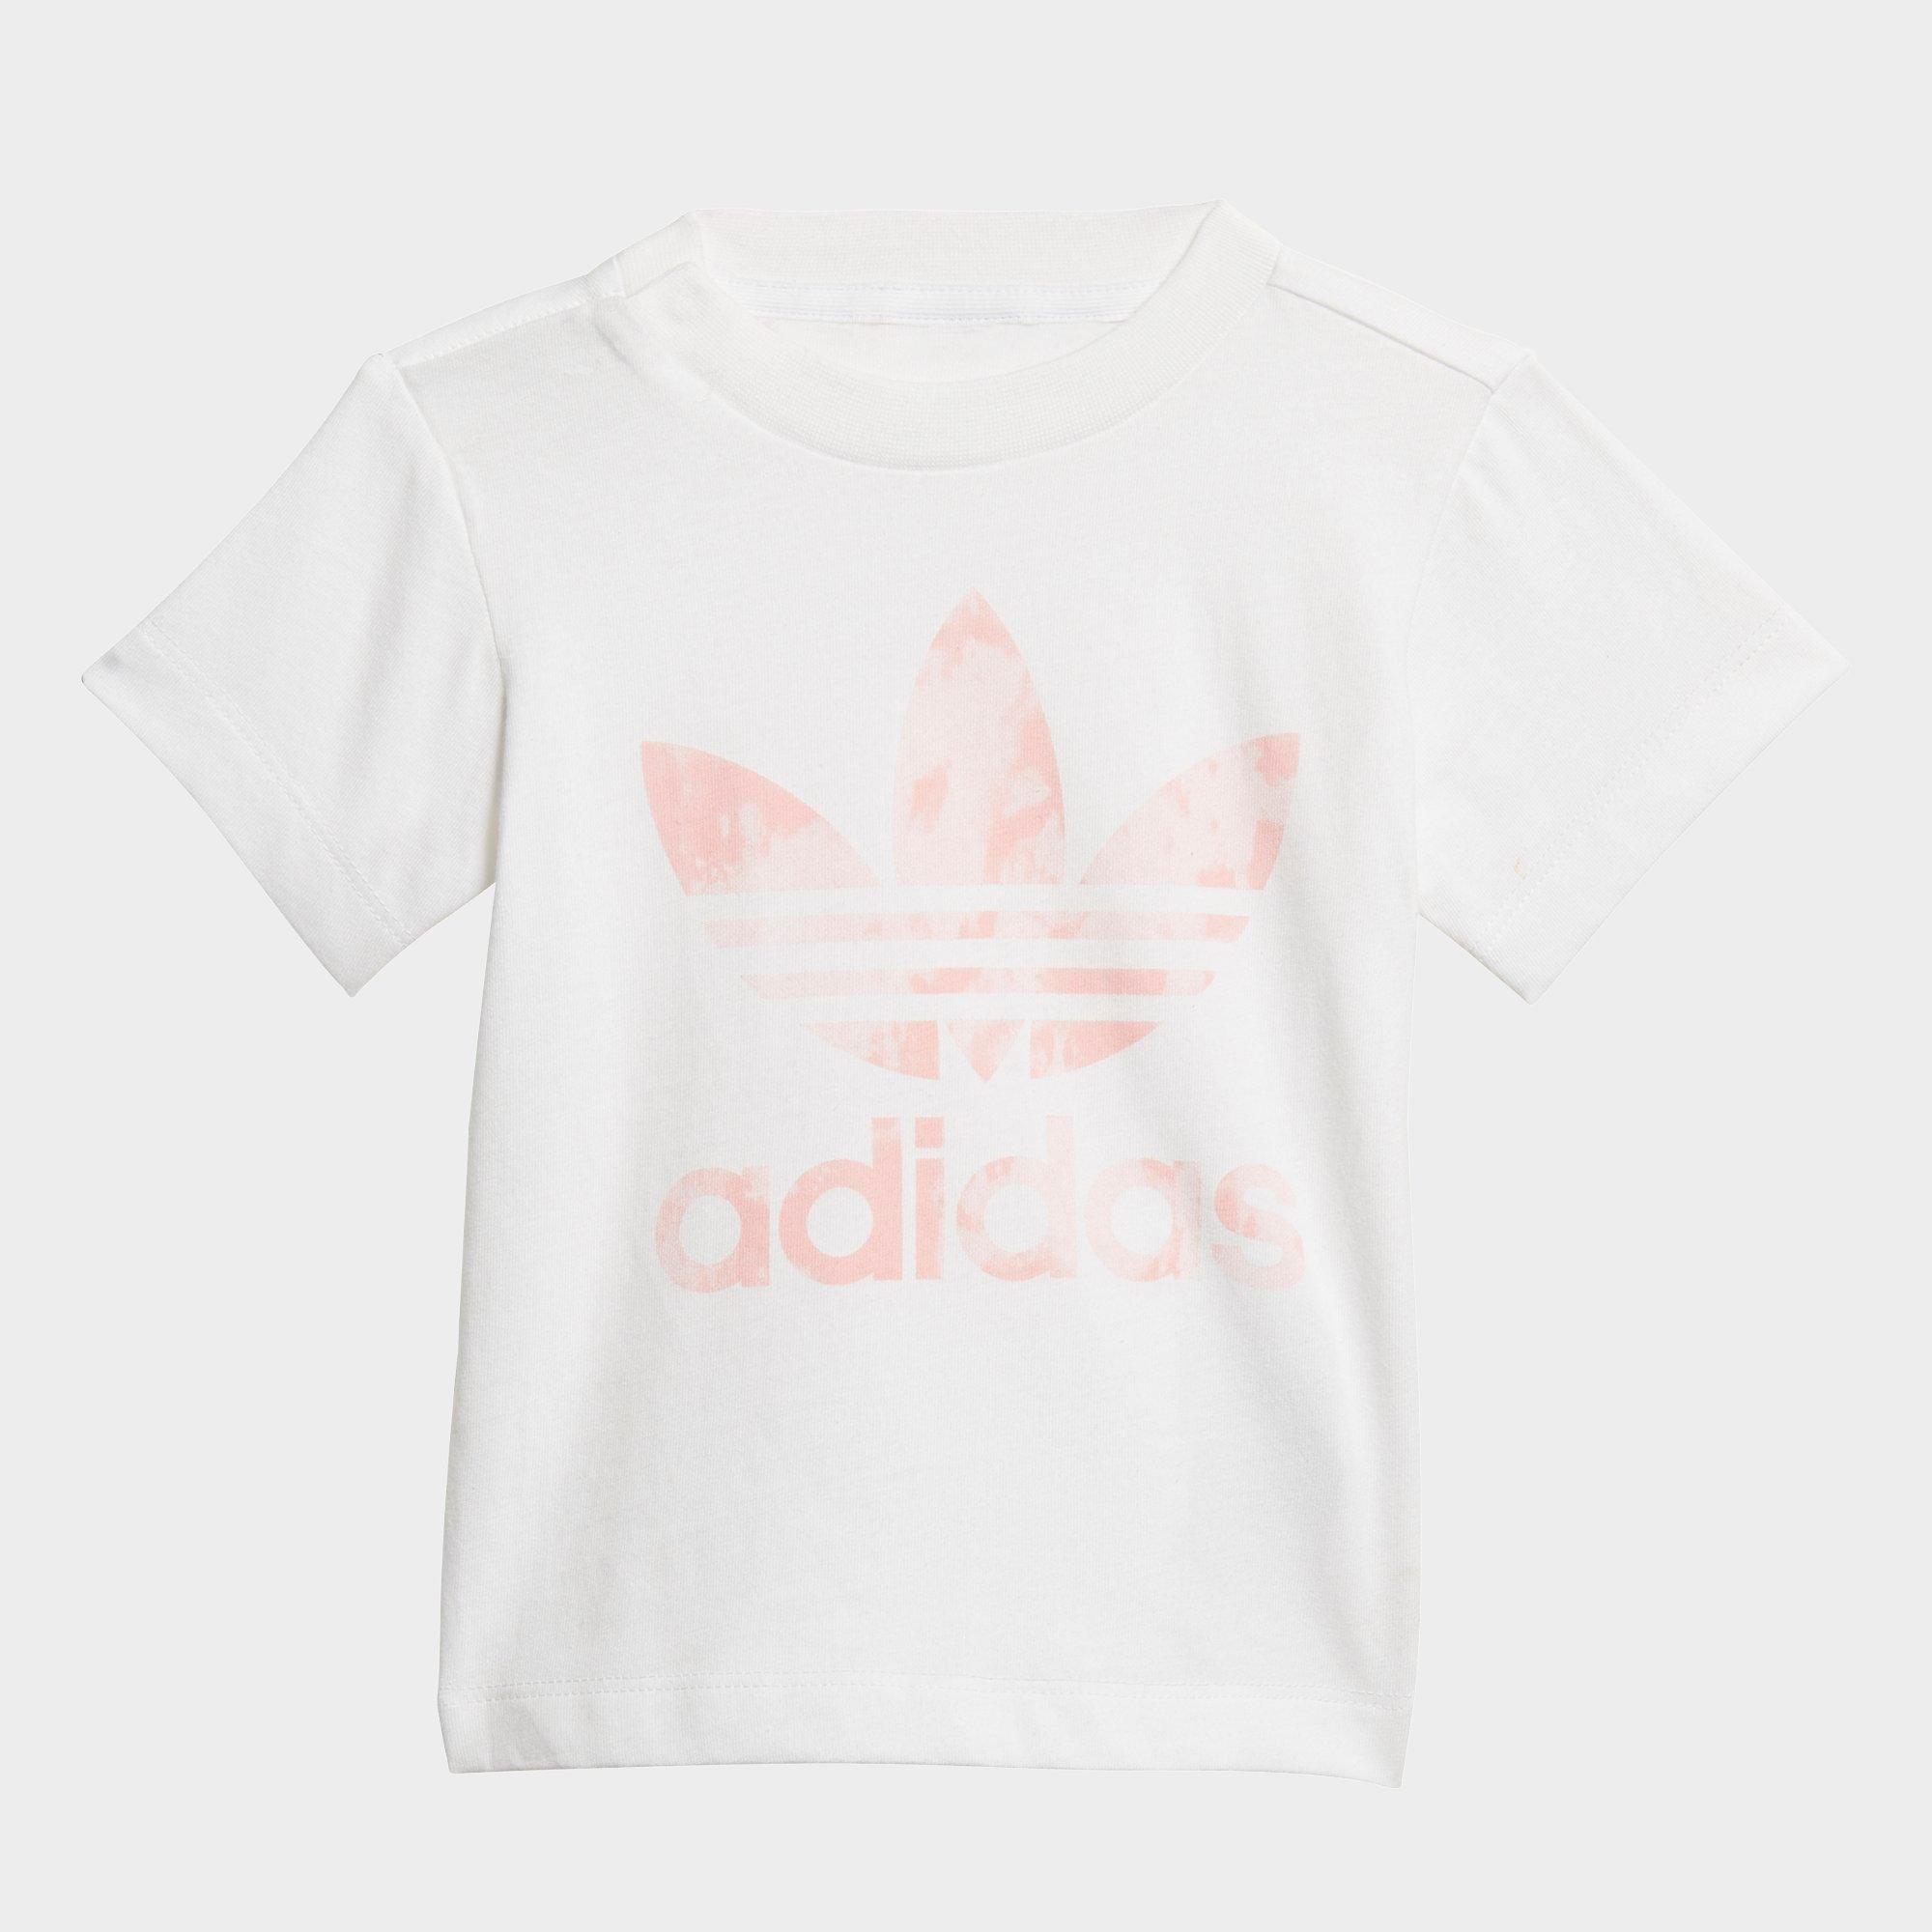 infant adidas top